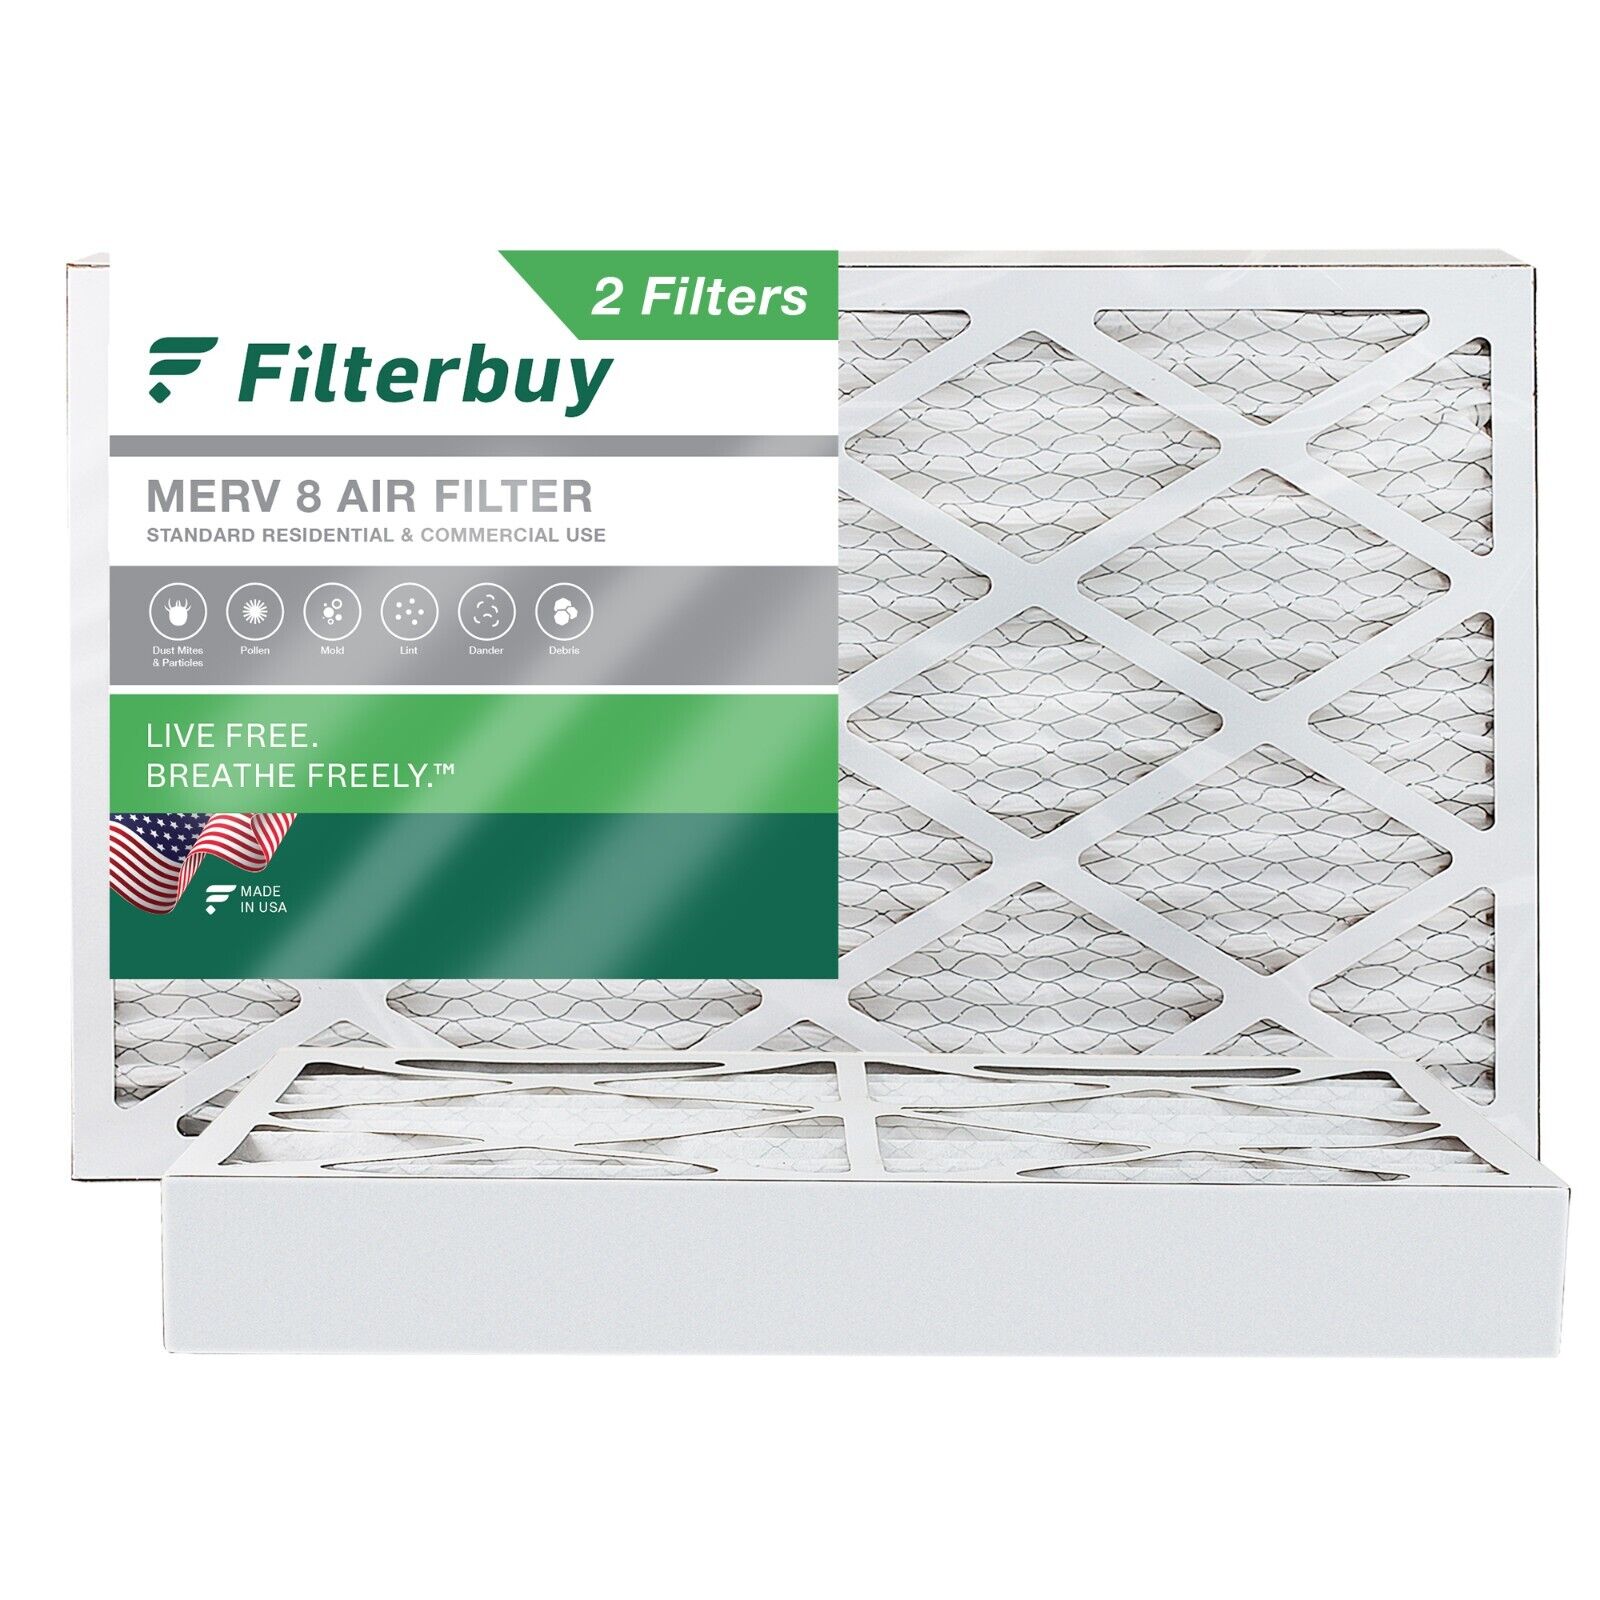 Filterbuy 16x25x4 Pleated Air Filters, Replacement for HVAC AC Furnace (MERV 8)